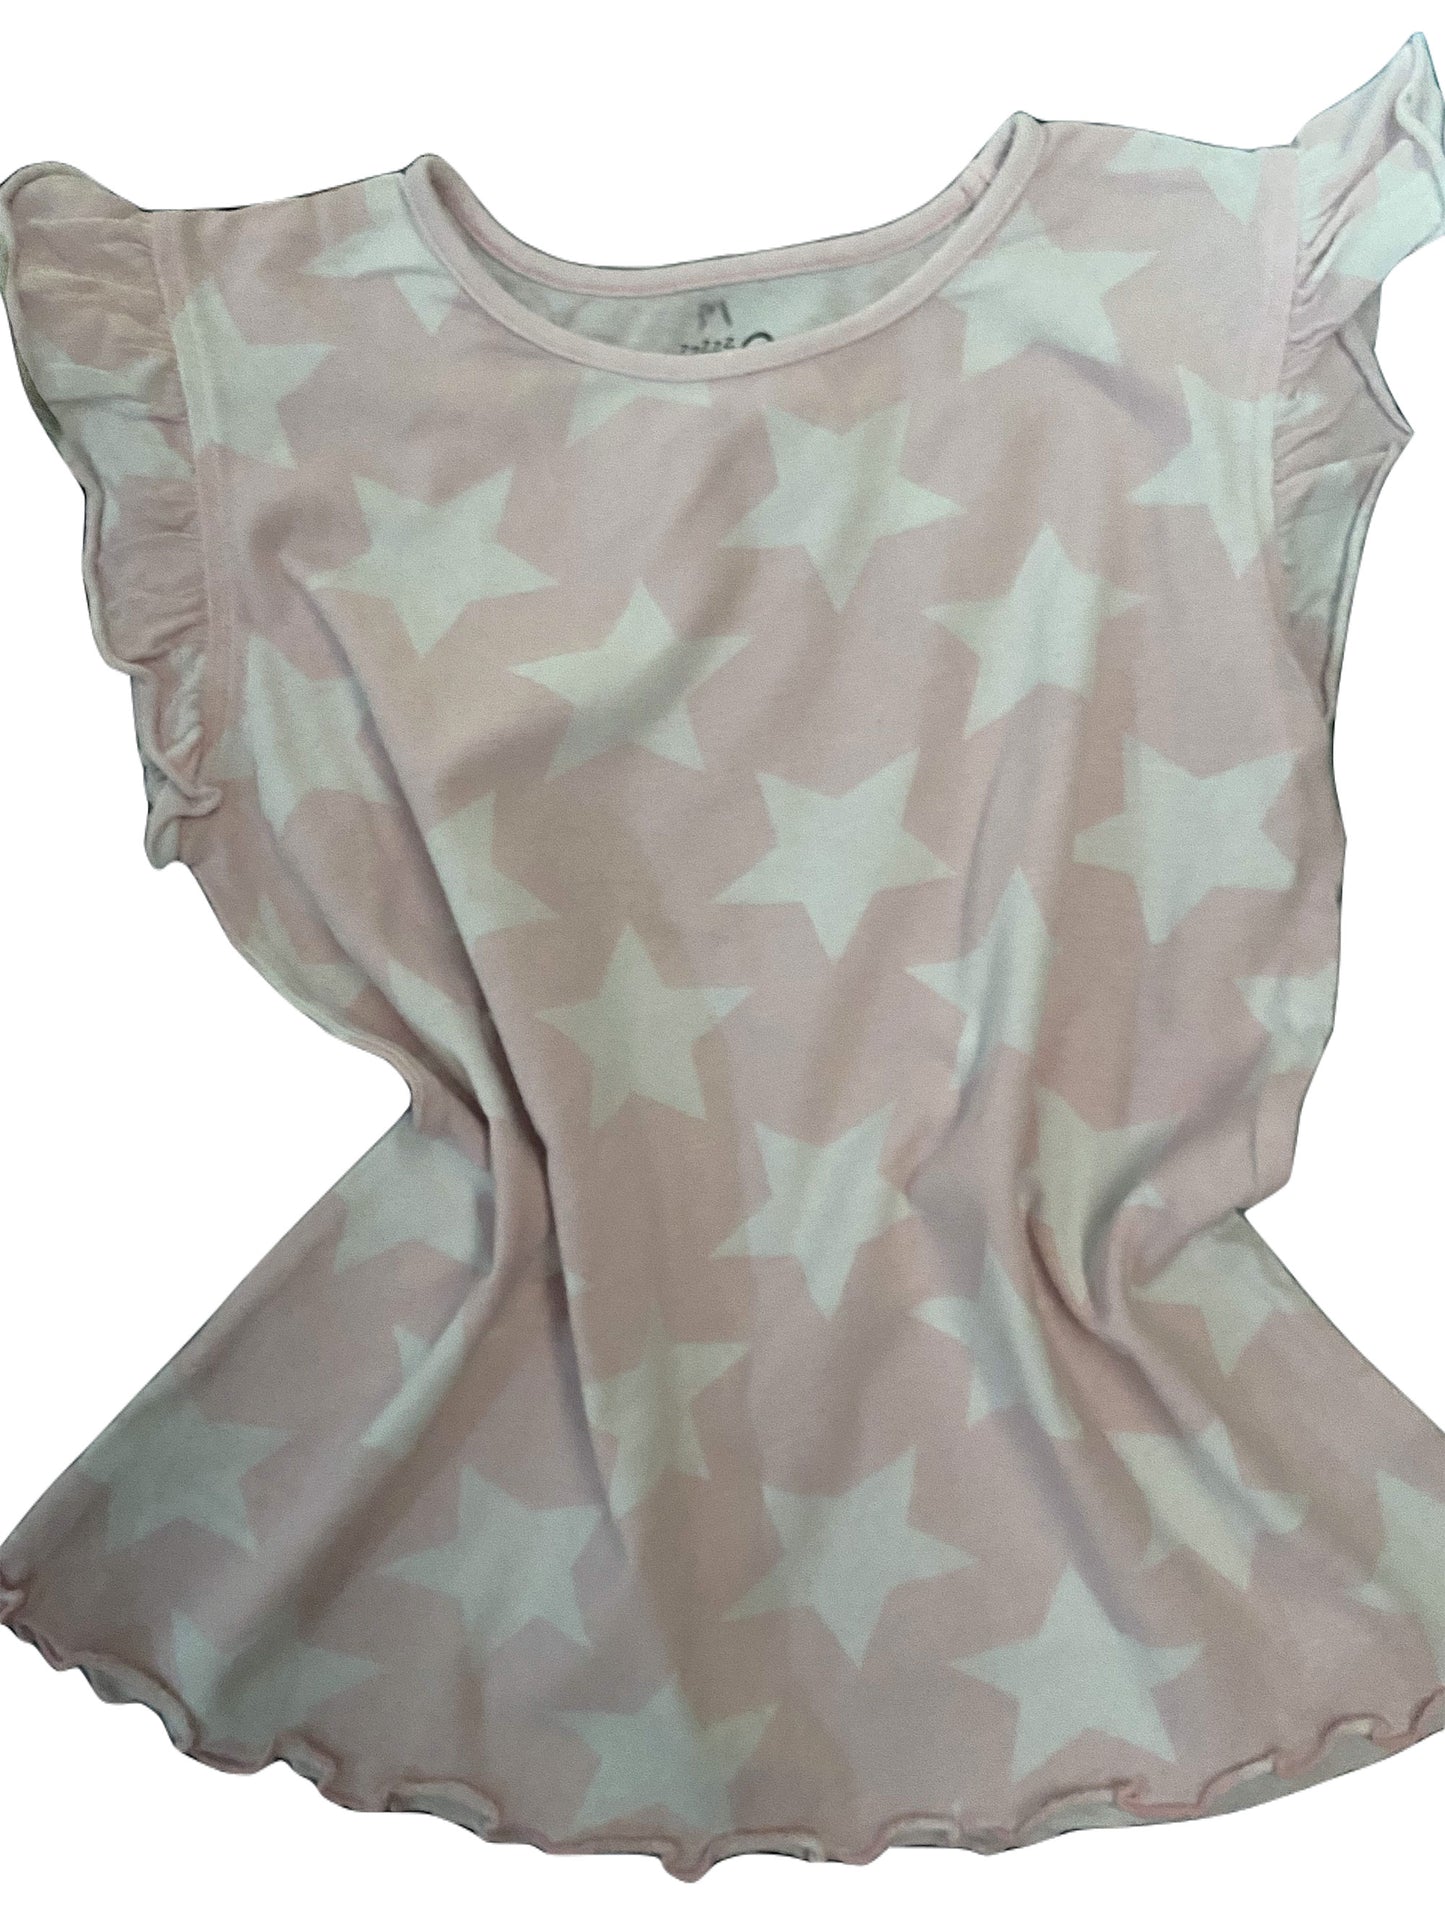 Frilly Sleeved Pink/White Stars Tee